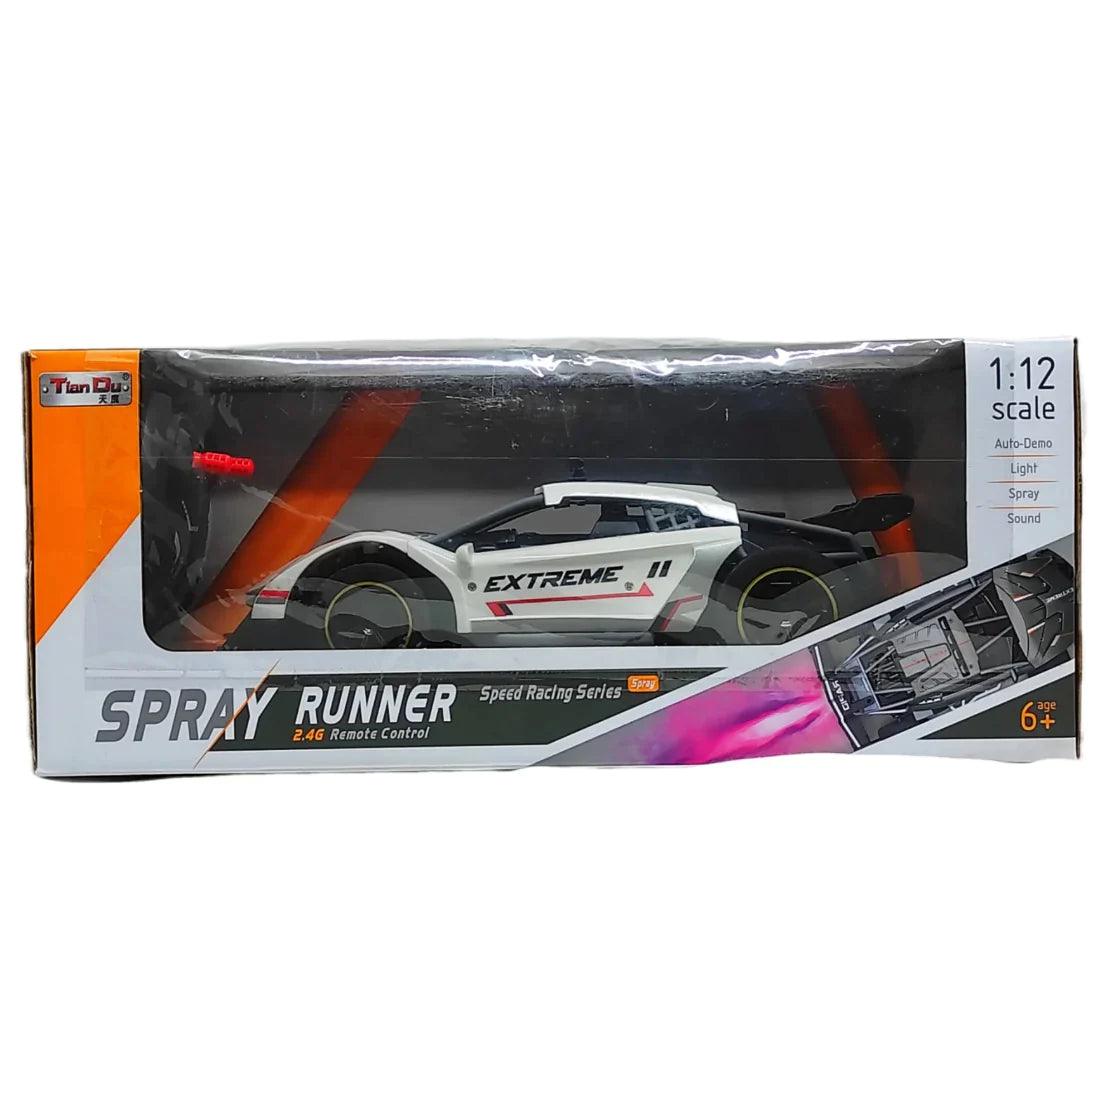 White-Silver RC Car, Spray Runner, Rechargeable Battery Car, Auto Demo, High Speed, Remote Control Car 1:12 Scale RC Fun Drift, for 6+ Kids to Adults - Ourkids - OKO